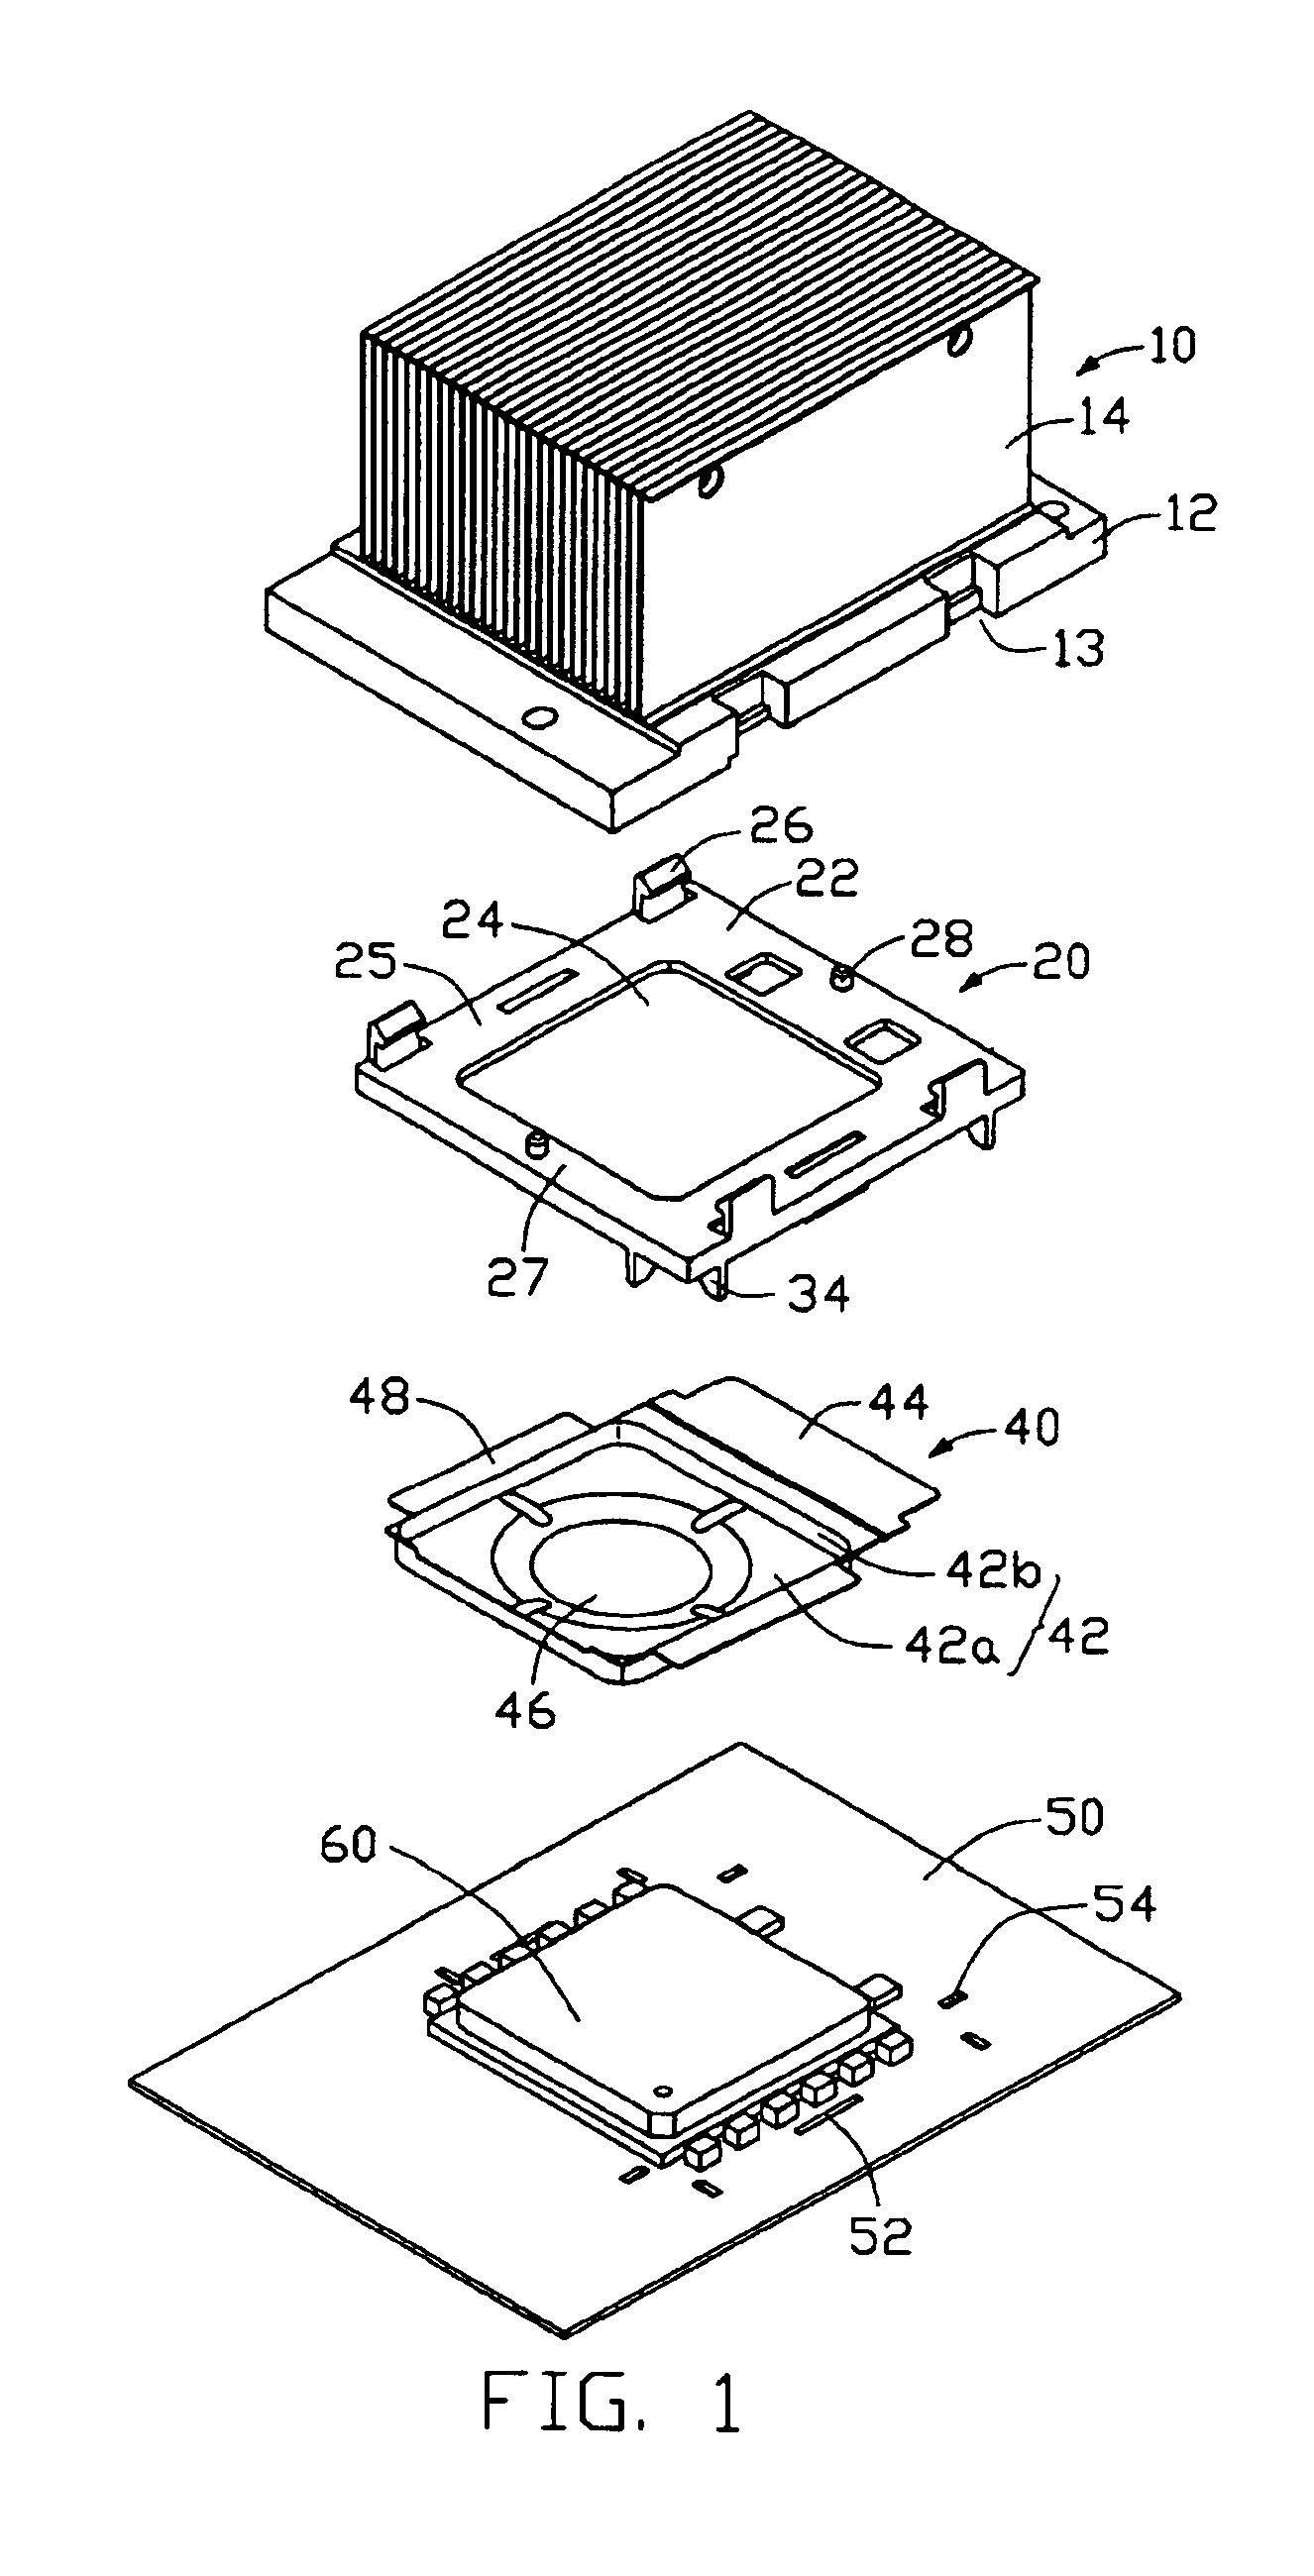 Heat sink assembly incorporating mounting frame